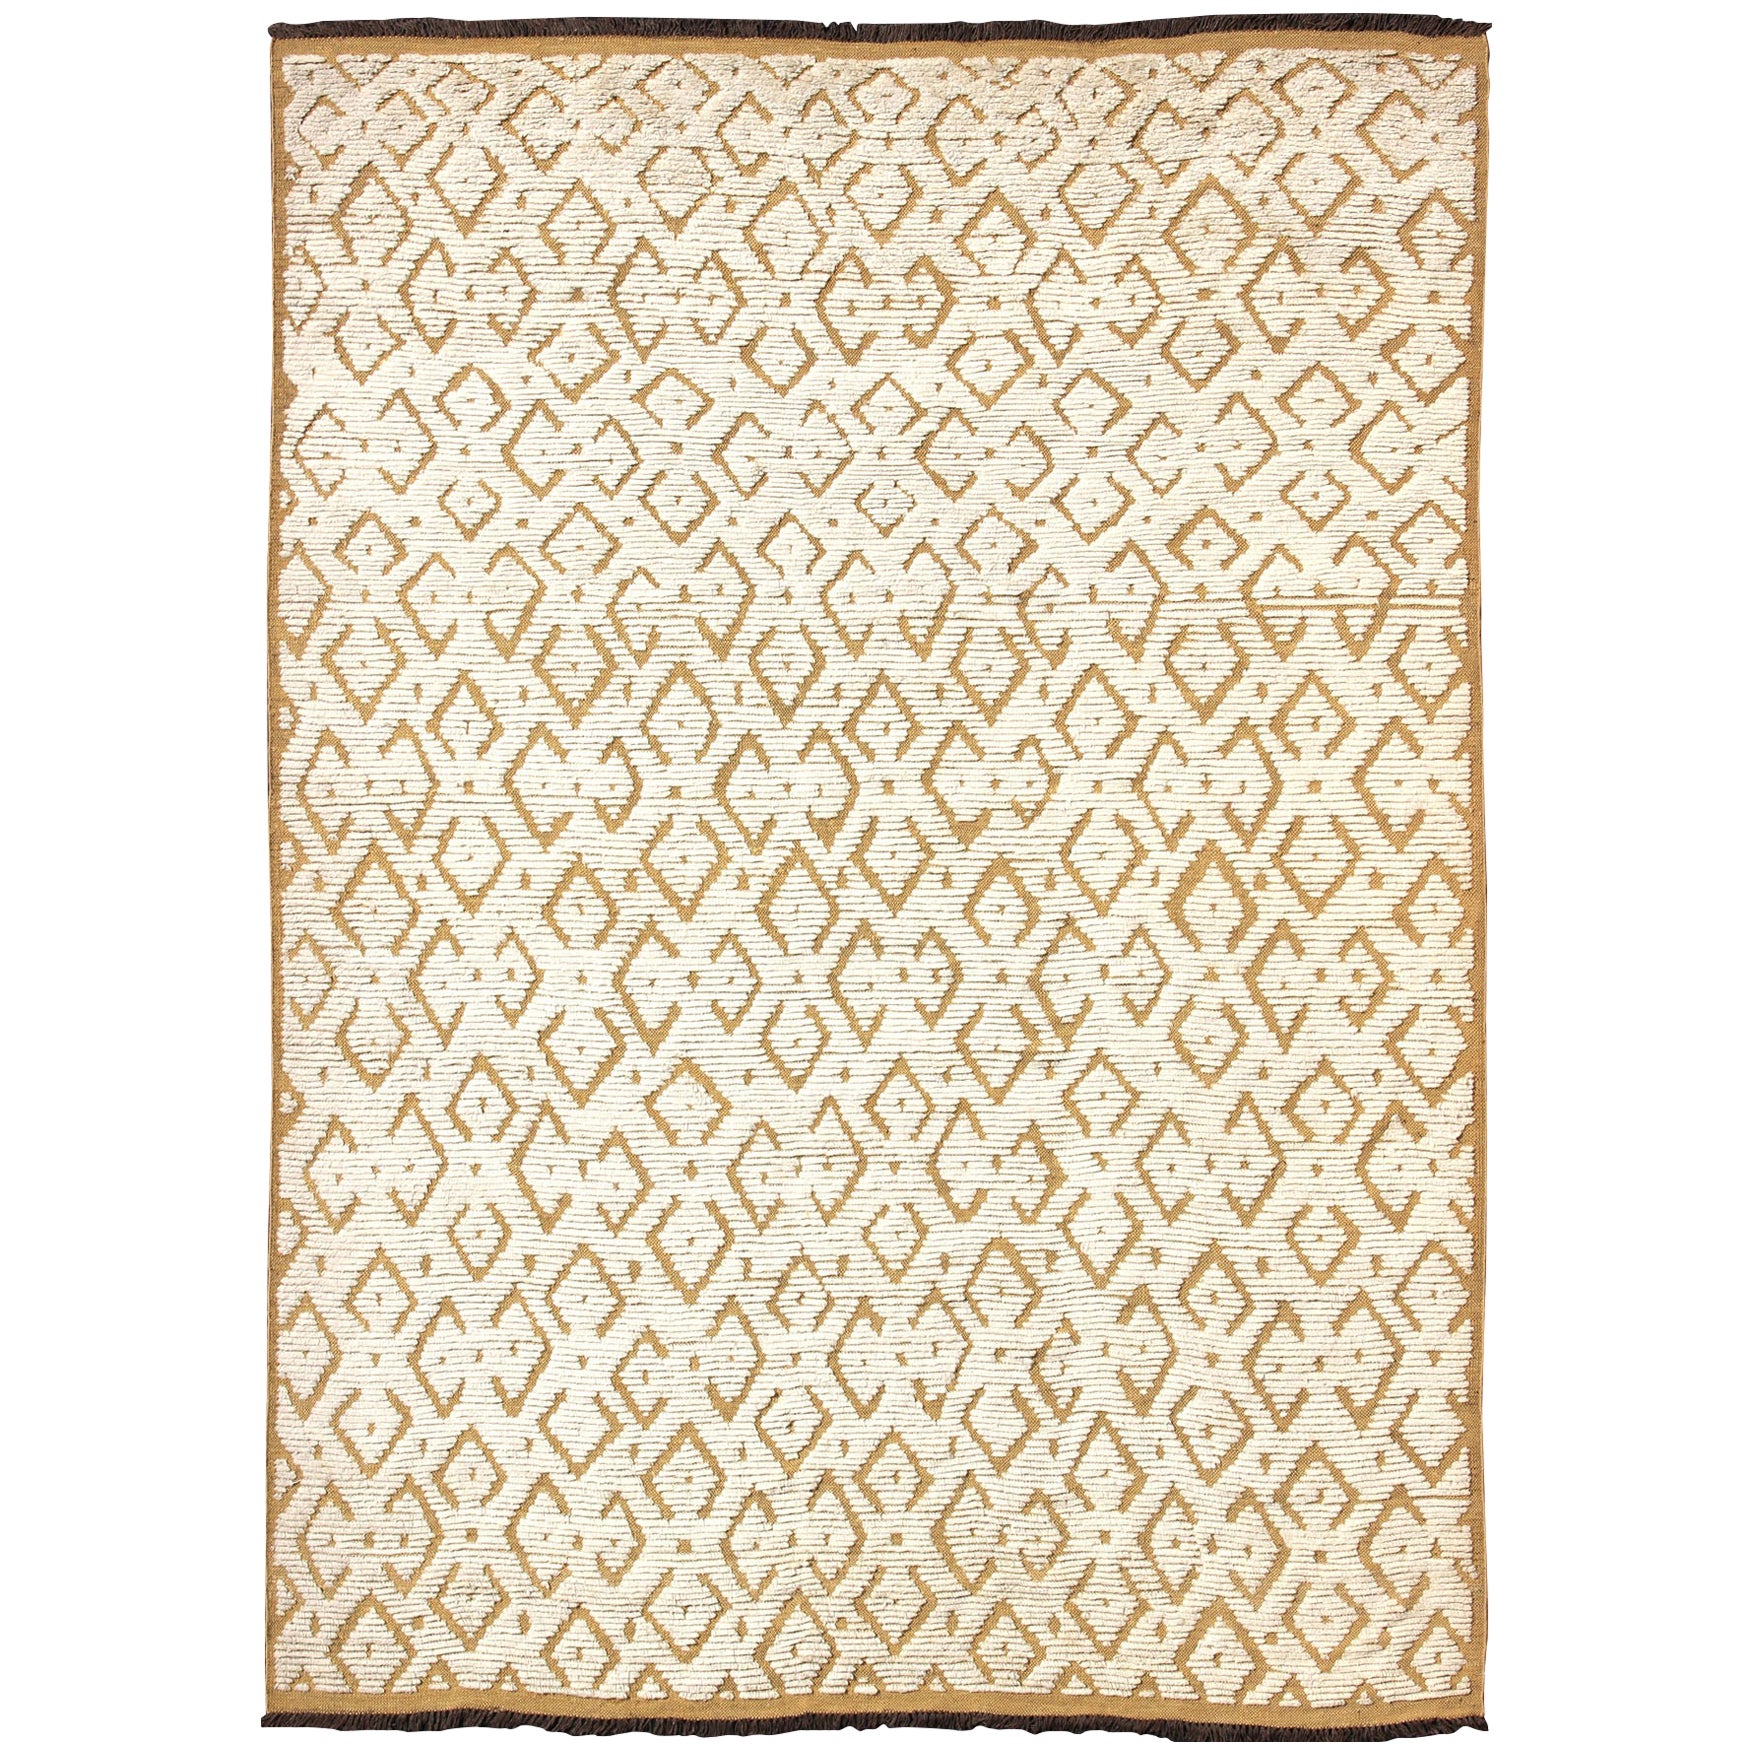 Large Modern Hand-Knotted Rug in Wool with Diamond Design in Marigold and Cream